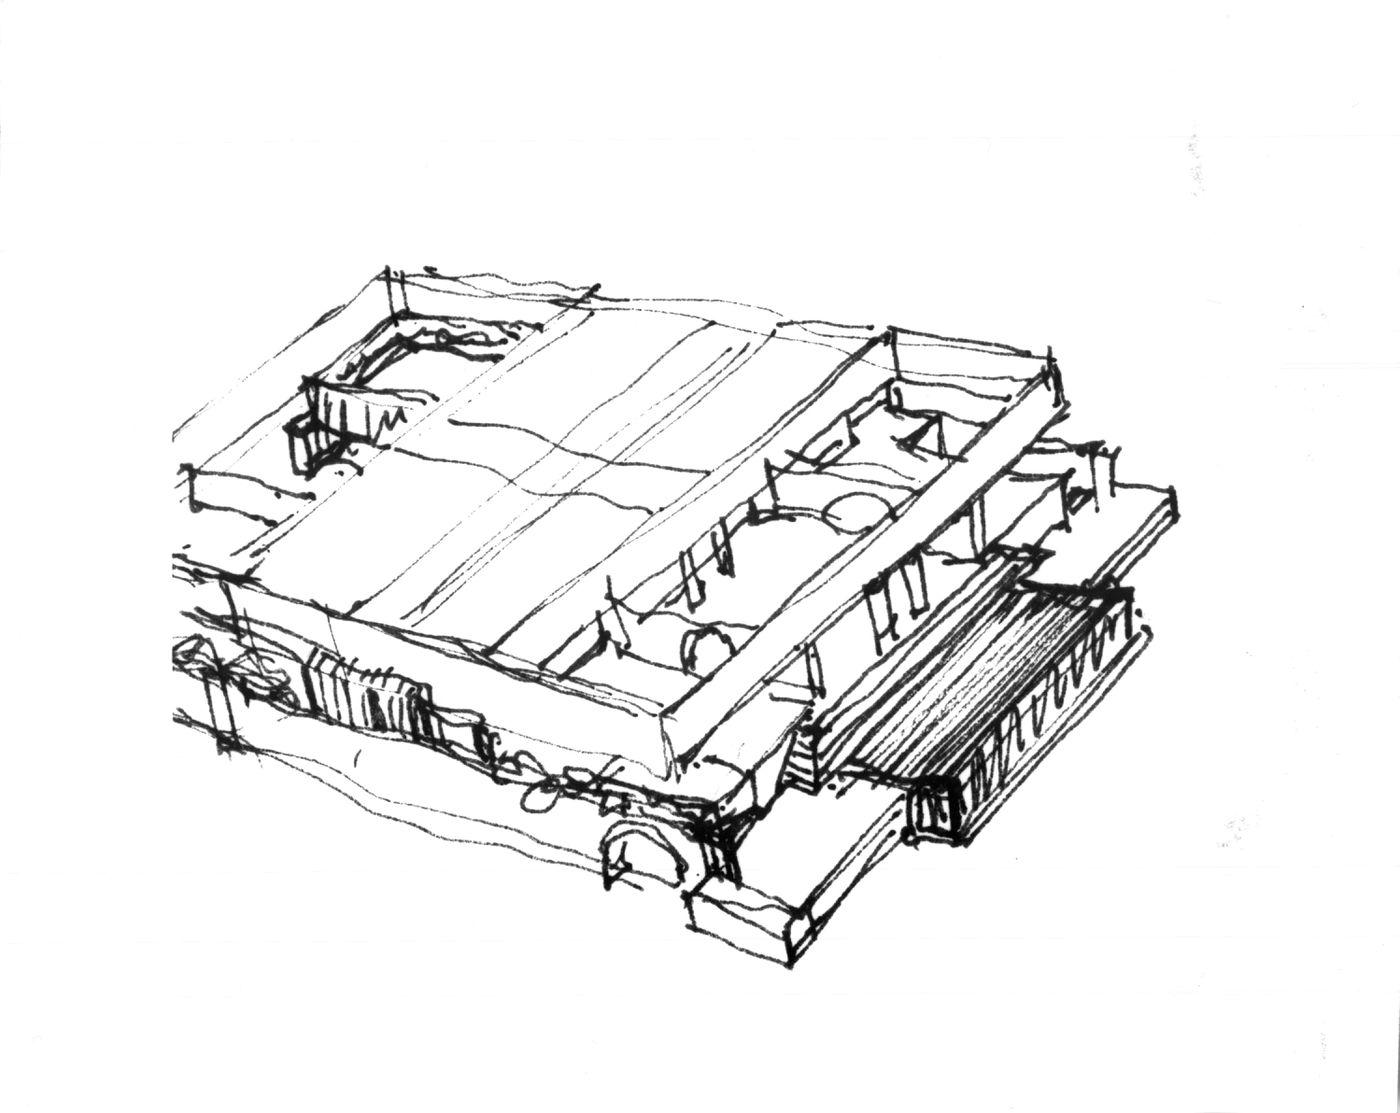 Early annotated ground floor plan, bird's-eye perspective of terraced house on podium